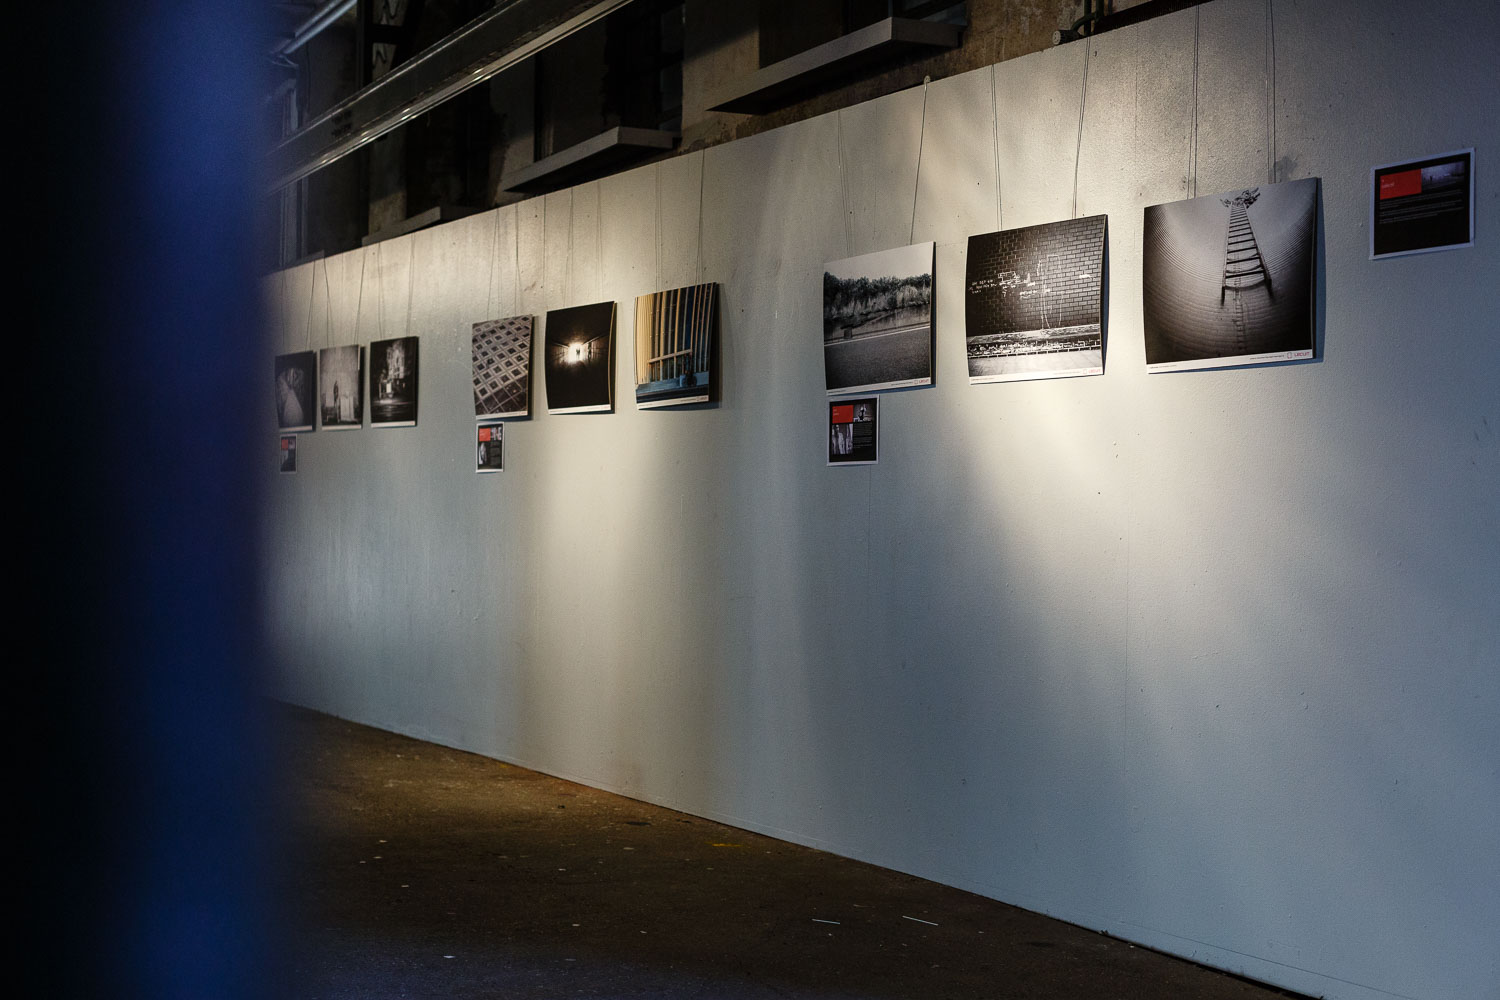 Collective exhibition by Street Photography Luxembourg at KUFA Kulturfabrik in Esch-sur-Alzette